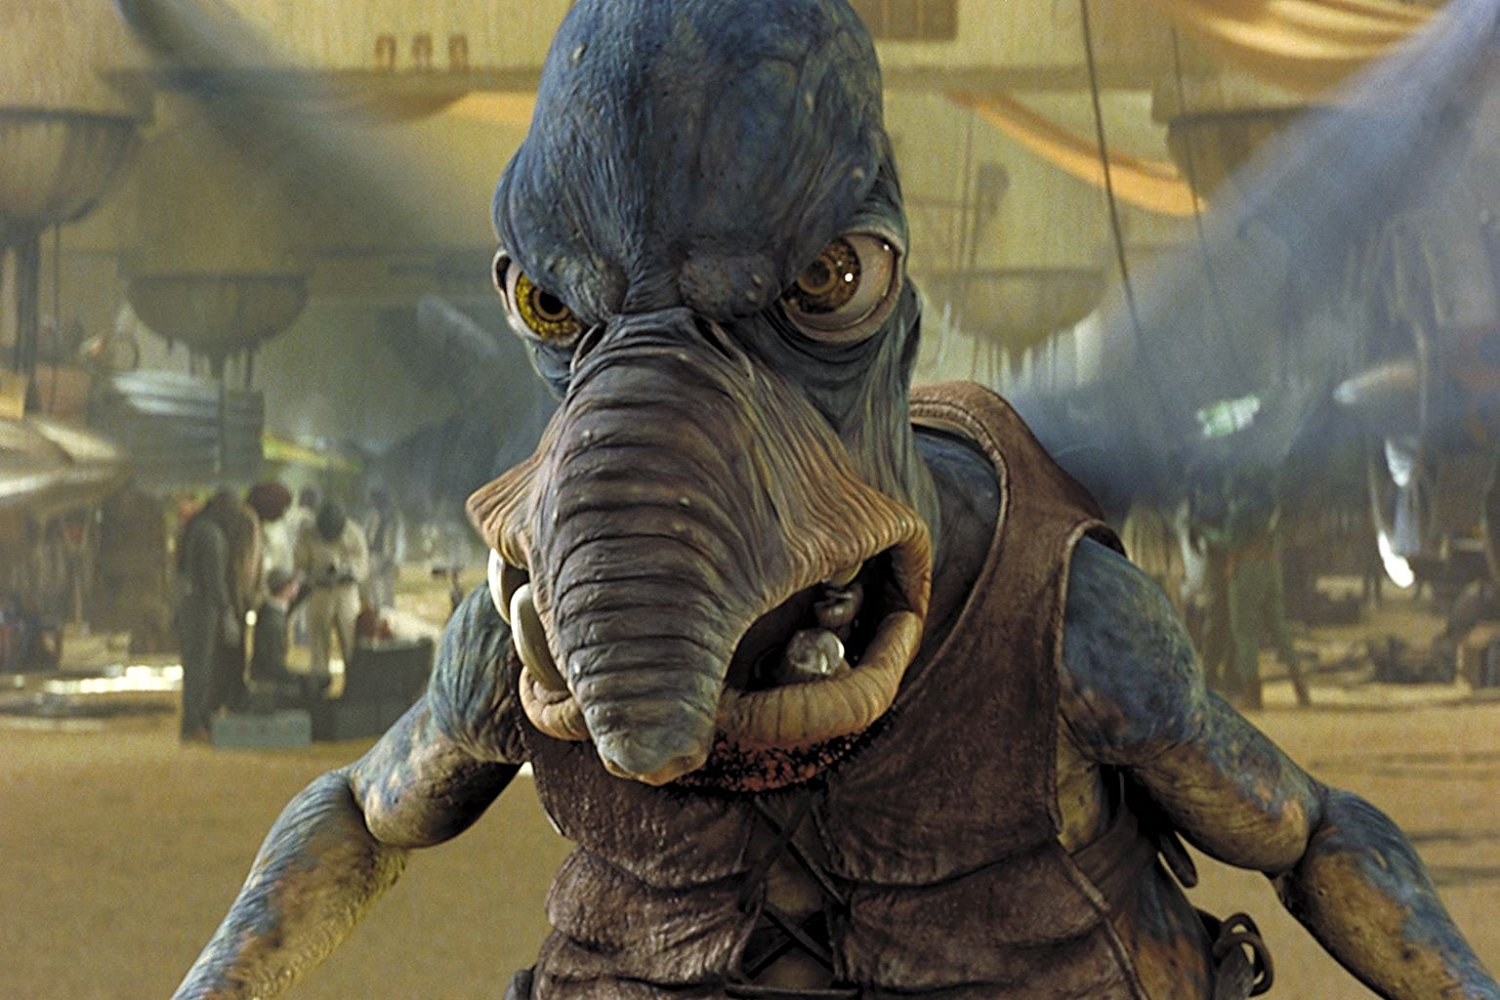 If You Hated The "Star Wars" Prequels You Probably Weren't Paying Attention